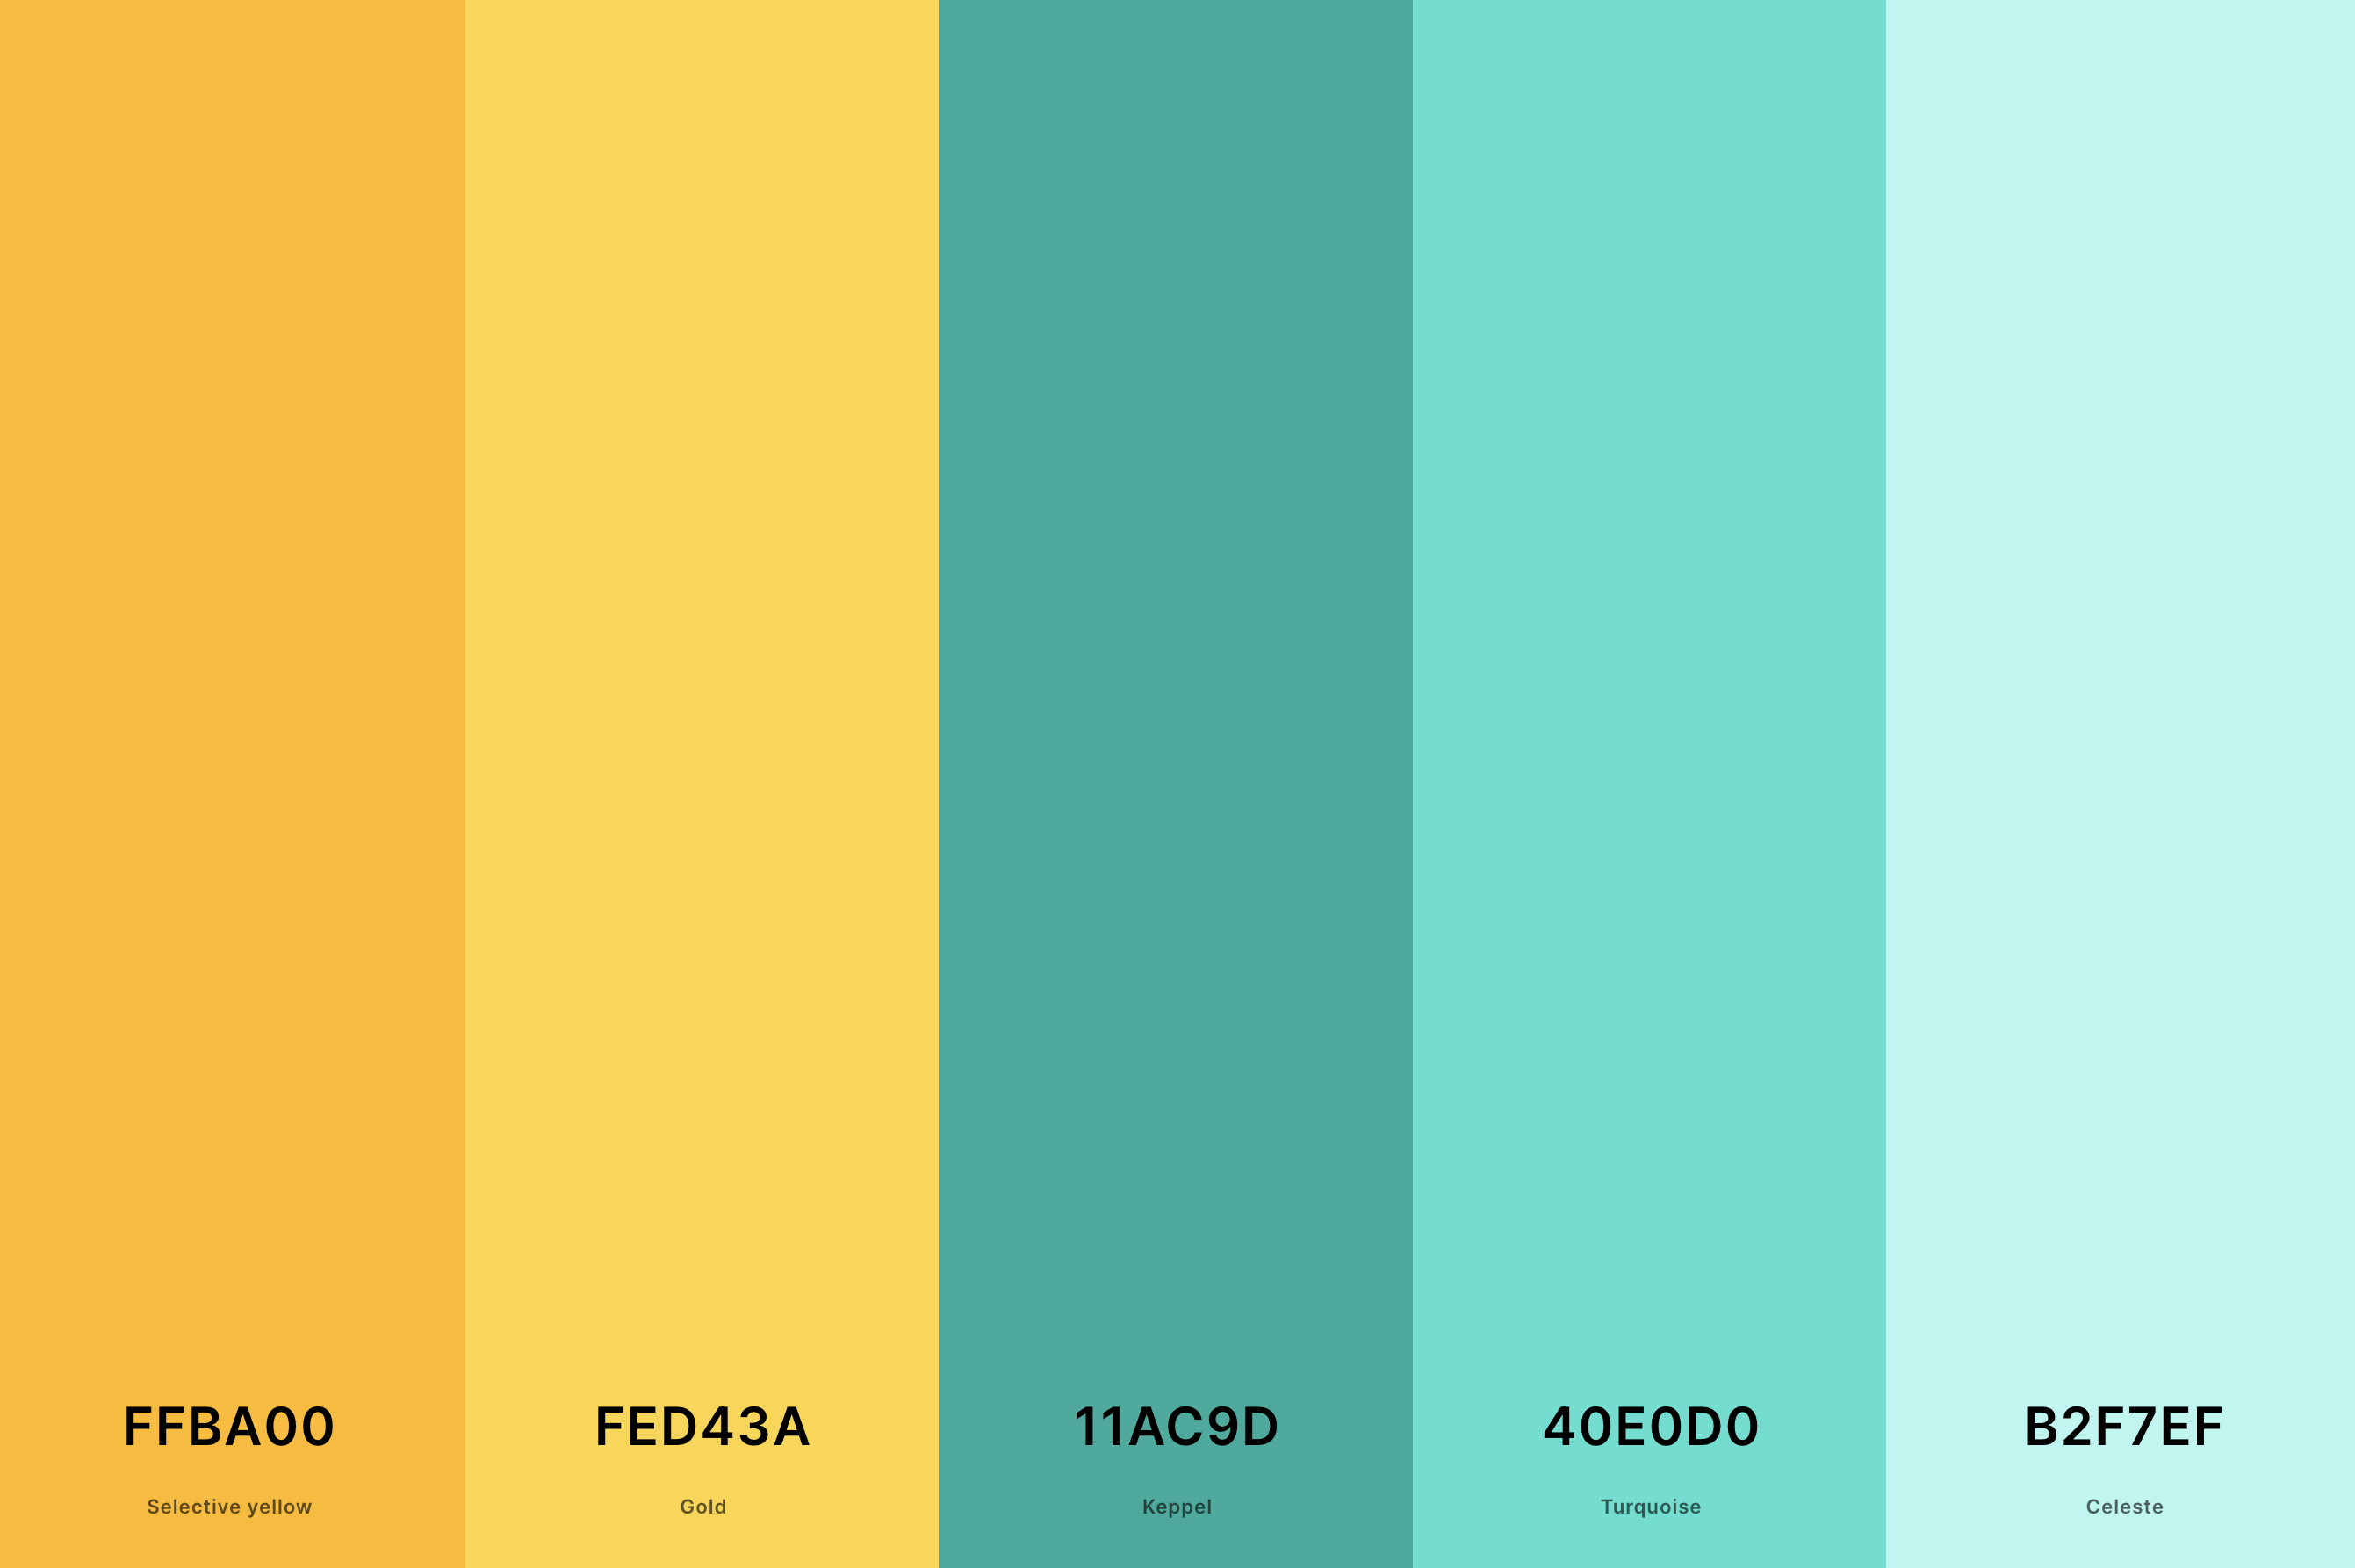 22. Turquoise And Gold Color Palette Color Palette with Selective Yellow (Hex #FFBA00) + Gold (Hex #FED43A) + Keppel (Hex #11AC9D) + Turquoise (Hex #40E0D0) + Celeste (Hex #B2F7EF) Color Palette with Hex Codes